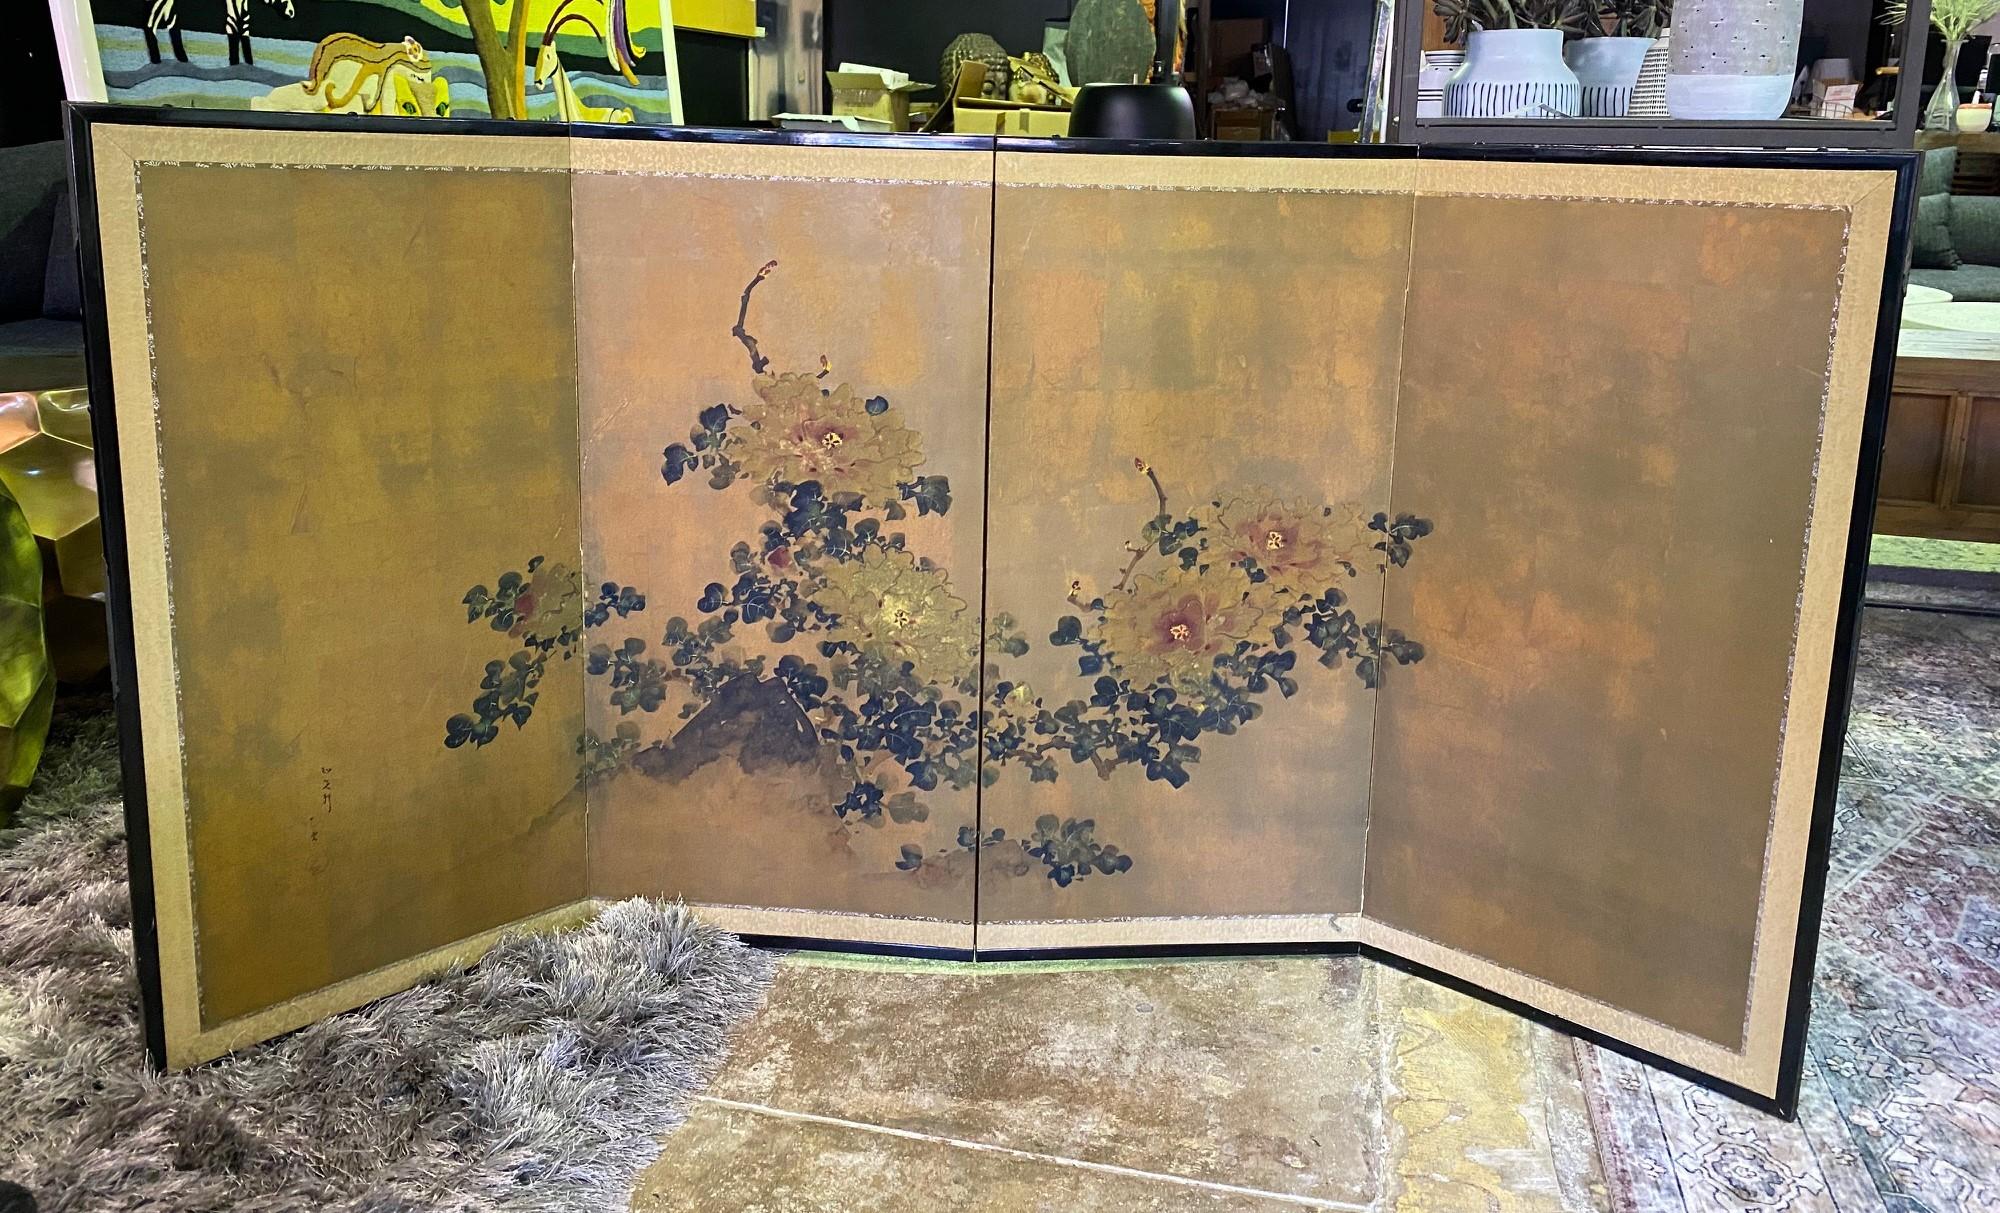 A gorgeous four-panel Japanese Byobu folding screen depicting a nature scene/ floral landscape. The dark, rich colors, gold leaf, and beautiful hand-painted detail of blooming flowers make this an attractive and special work.

Signed and sealed by